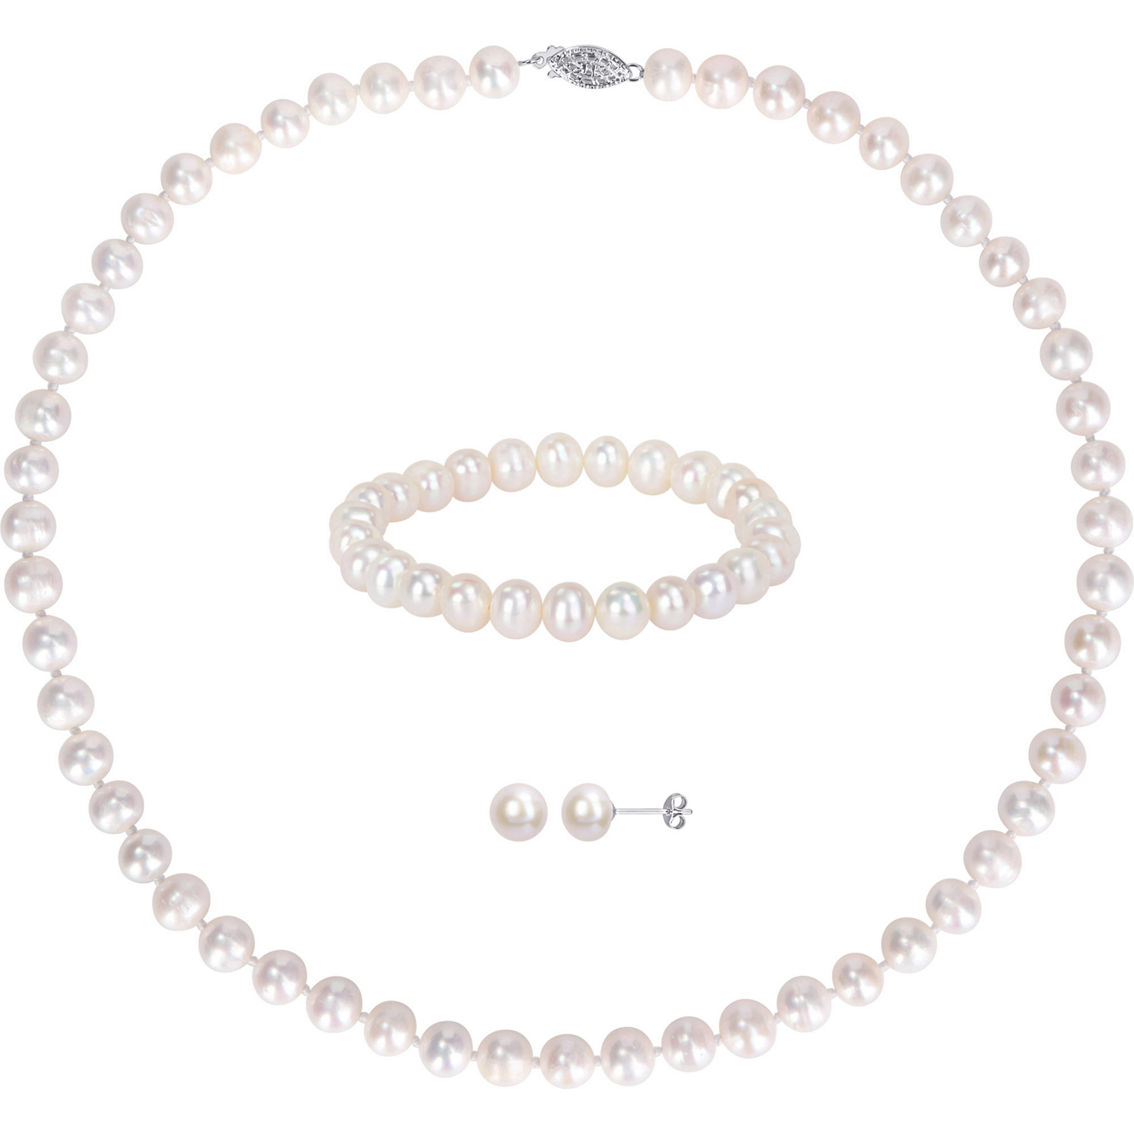 Sofia B. Cultured Pearl 3 pc. Set Necklace Earrings & Bracelet in Sterling Silver - Image 2 of 6